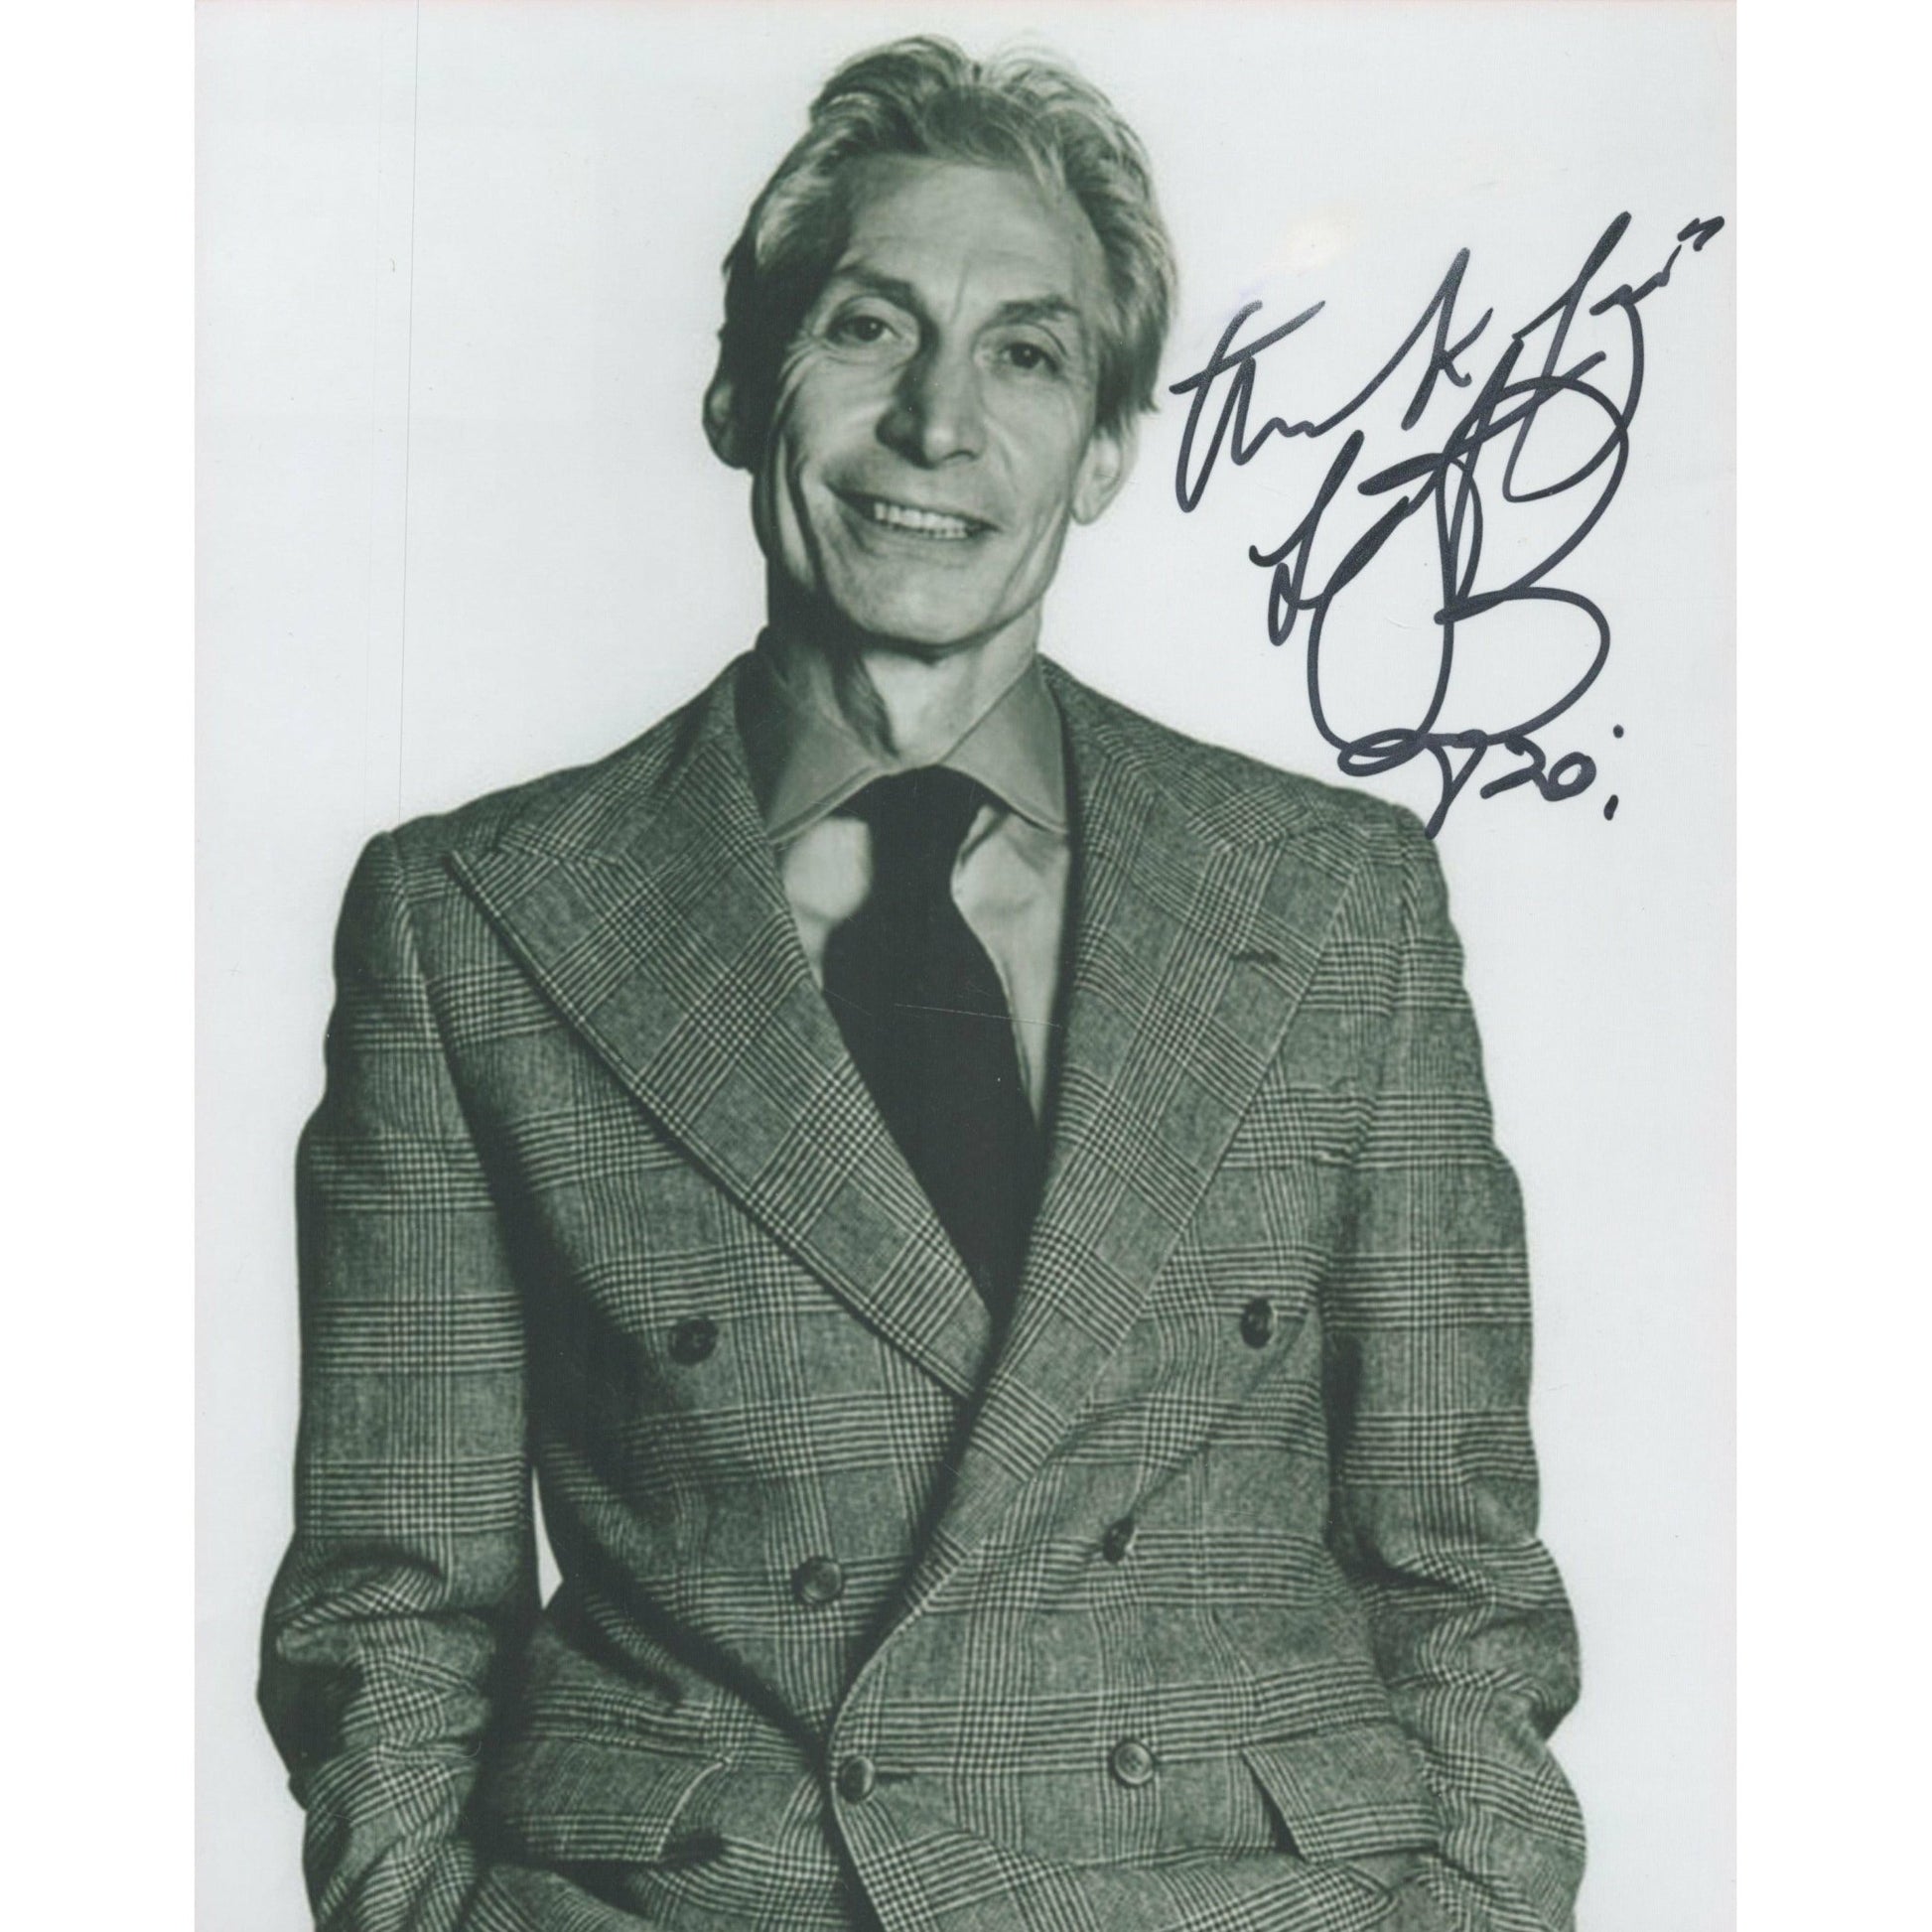 Charlie Watts Rolling Stone signed/autographed photograph - The Memorabilia Club